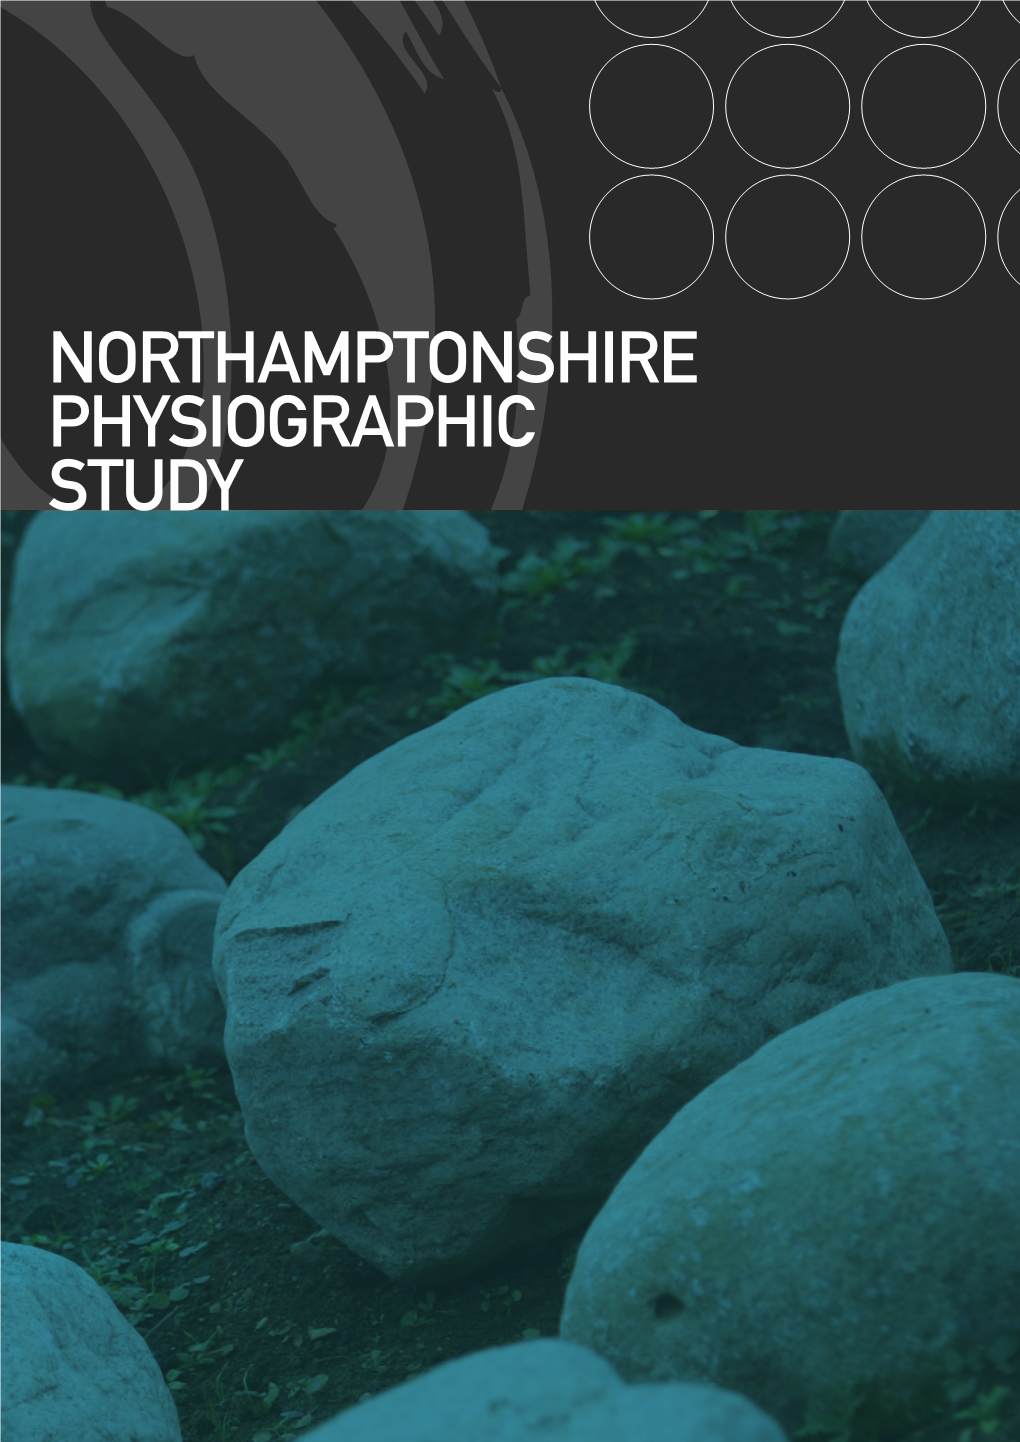 Northamptonshire Physiographic Study Contents